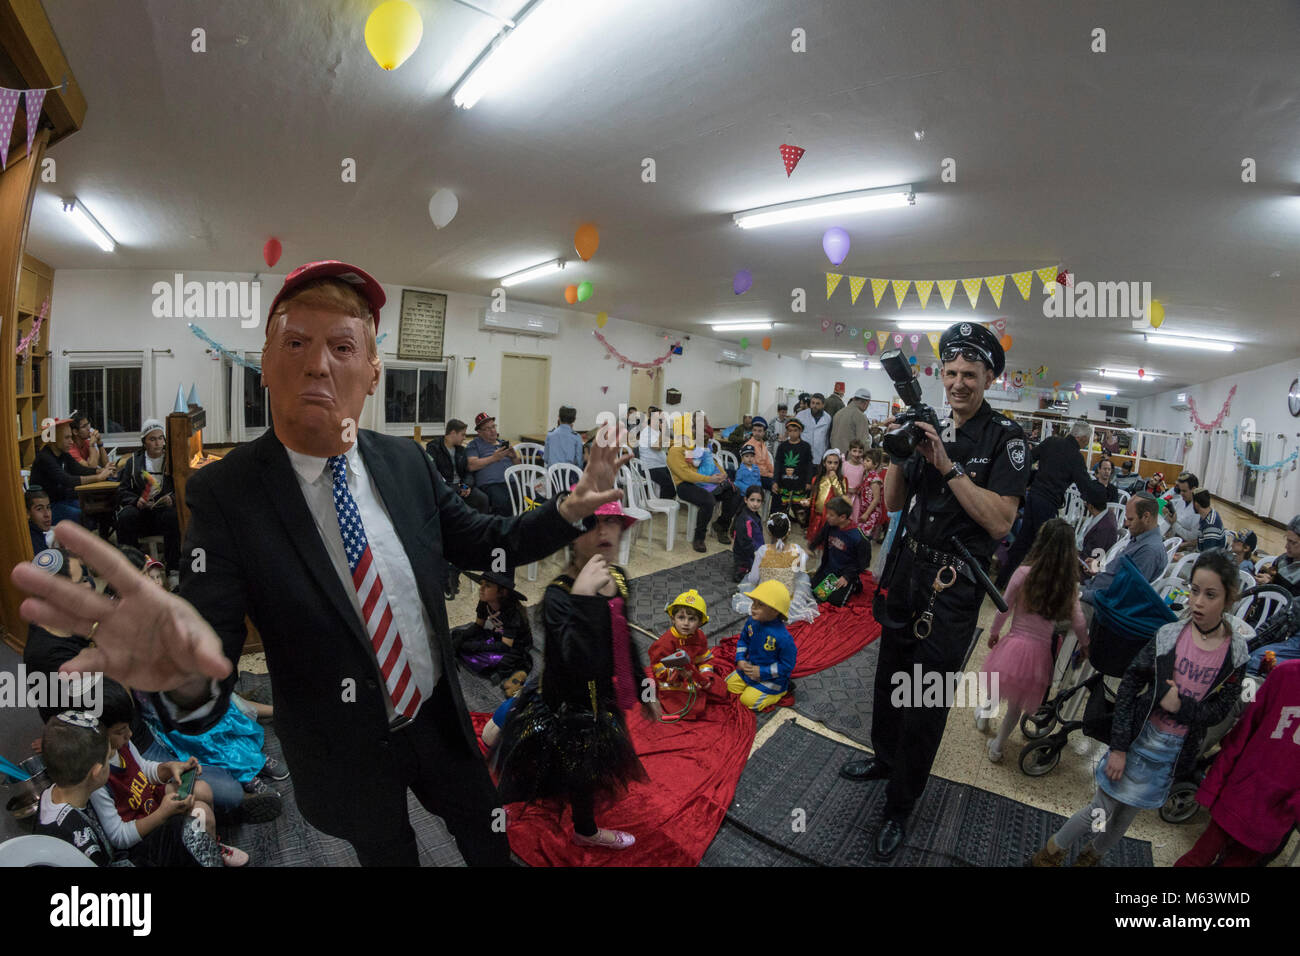 Elkana, Israel. 28th Feb, 2018. Purim holiday celebrations, Elkana, Israel. February 28th, 2018. A man with a Trump Mask and other people in costumes celebrate the Jewish holiday of Purim. In this holiday Jews traditionaly dress in costumes, read the scroll of Esther, a story about an anti-jewish failed plot in ancient Persia, and make a racket whenever the name of Haman, the main antagonist, is mentioned. Credit: Yagil Henkin/Alamy Live News Stock Photo